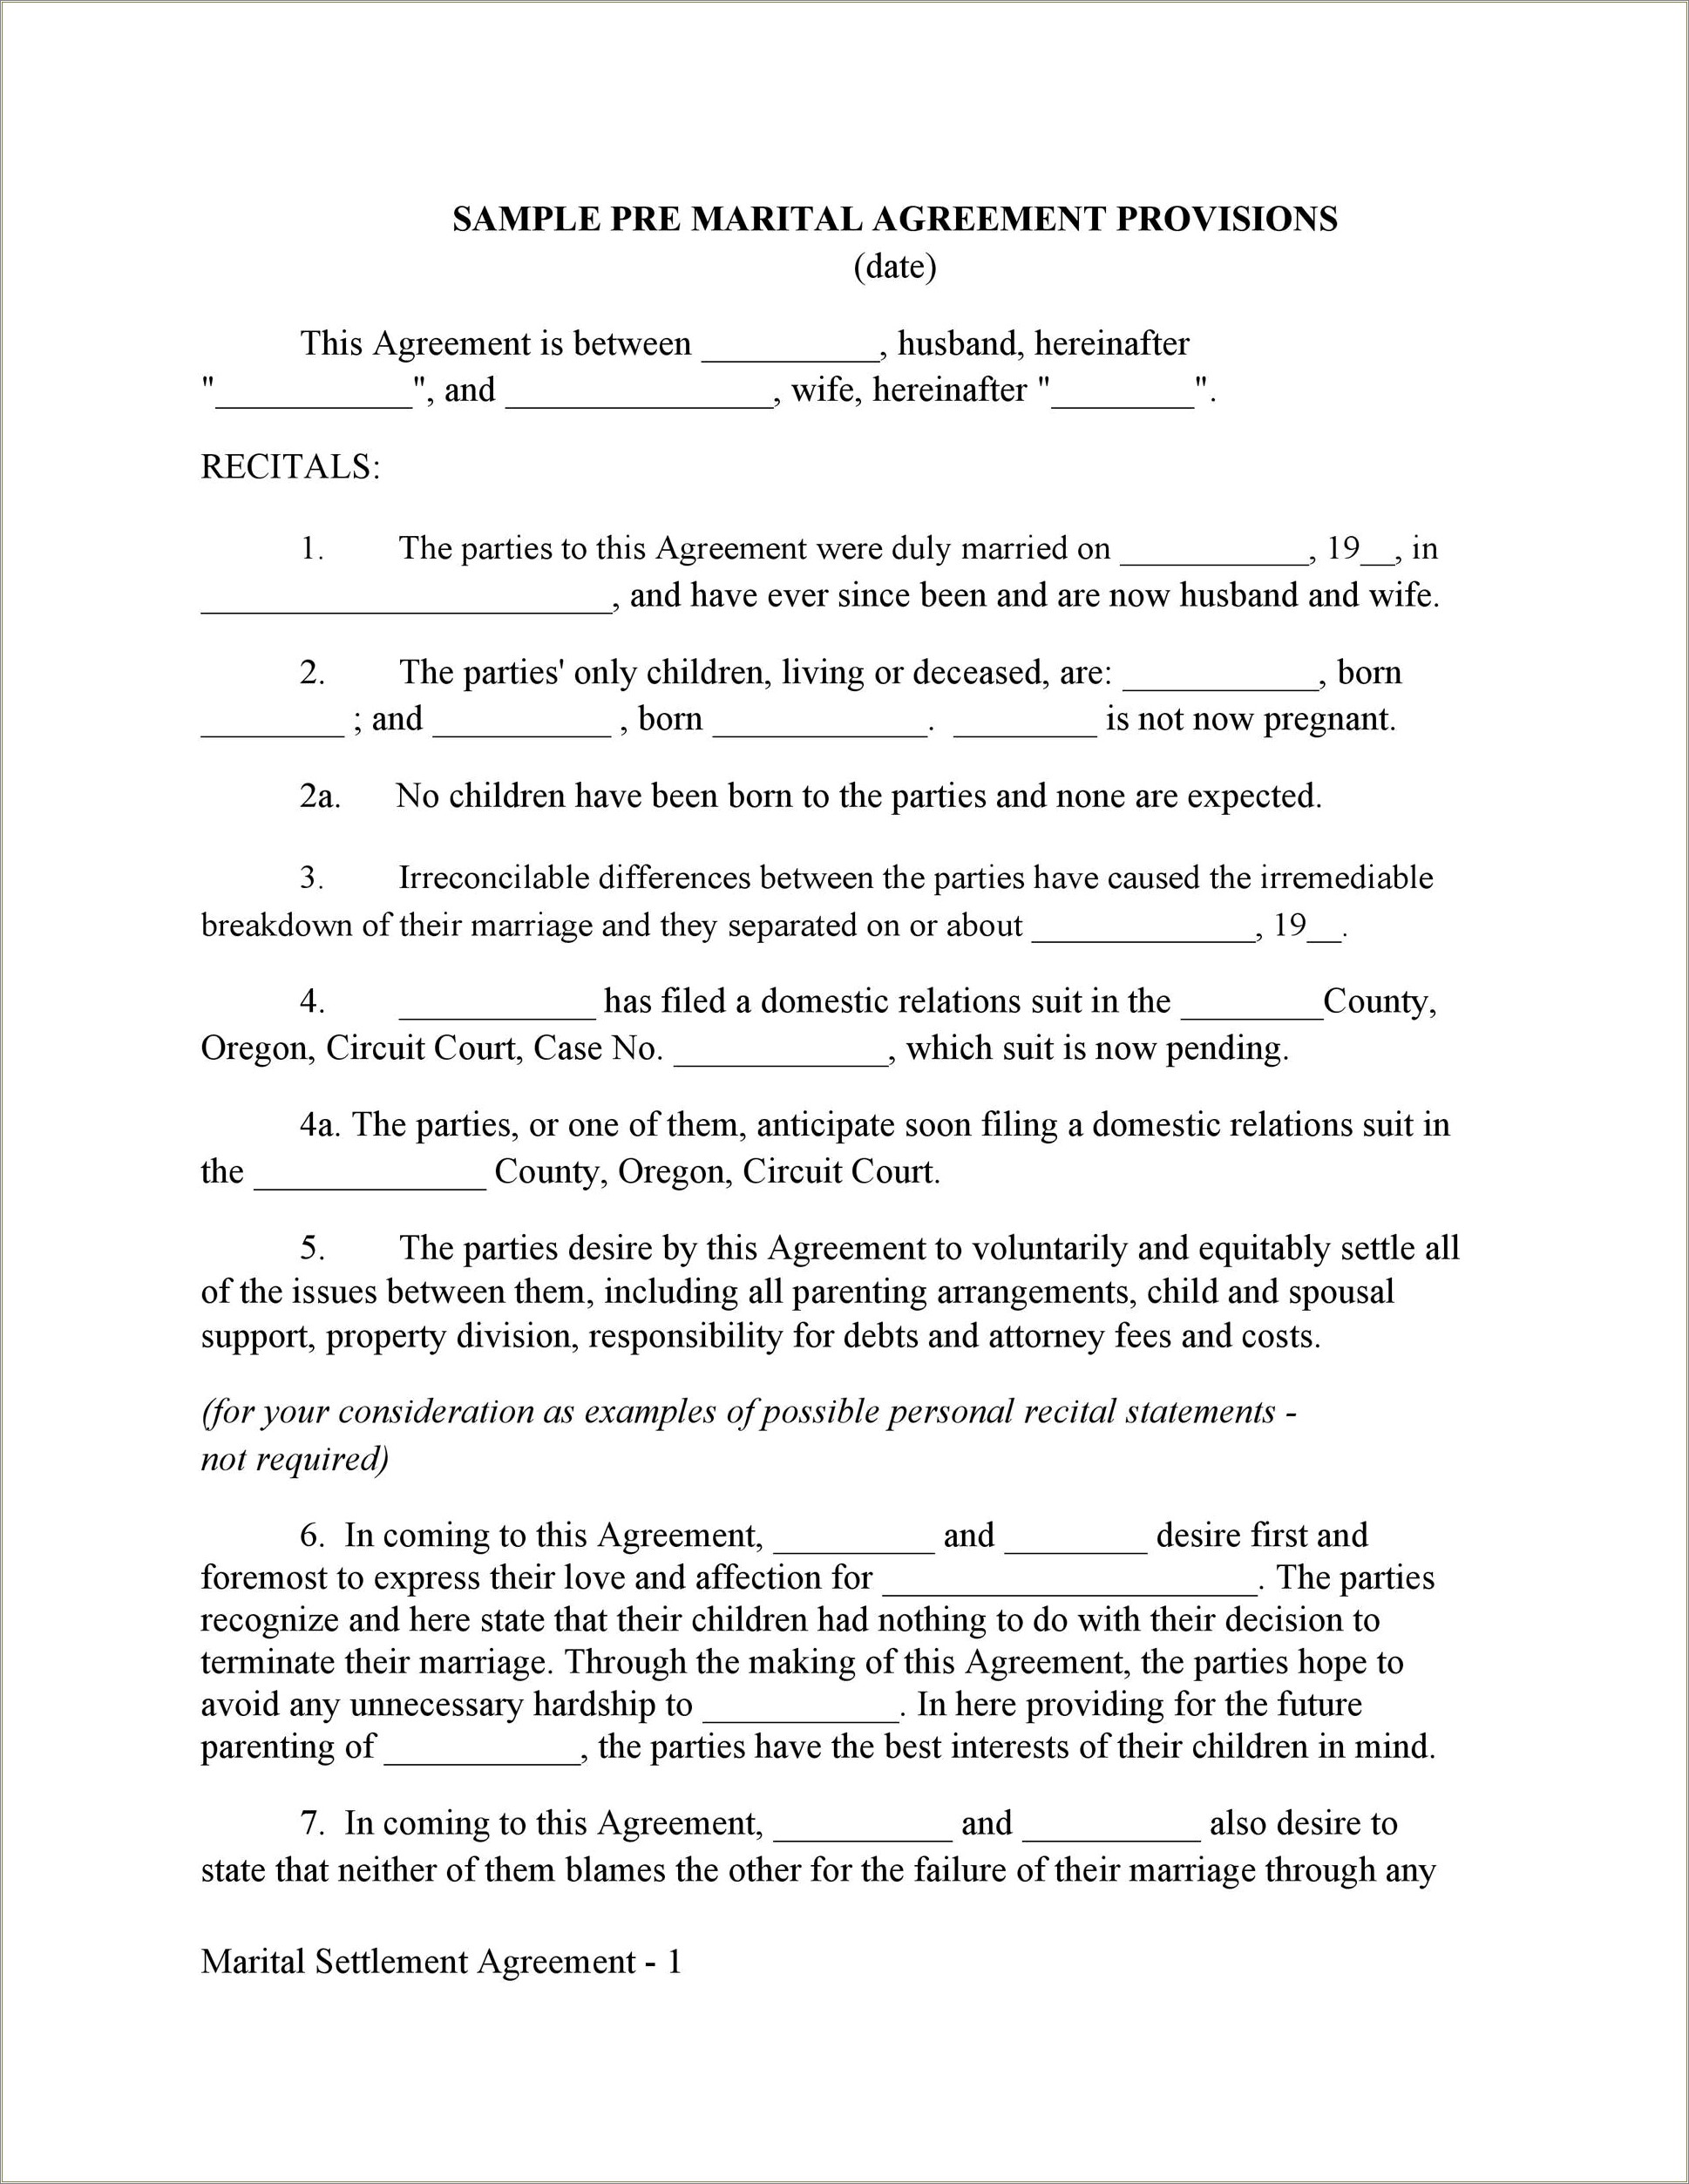 Living Together And Property Agreement Free Template